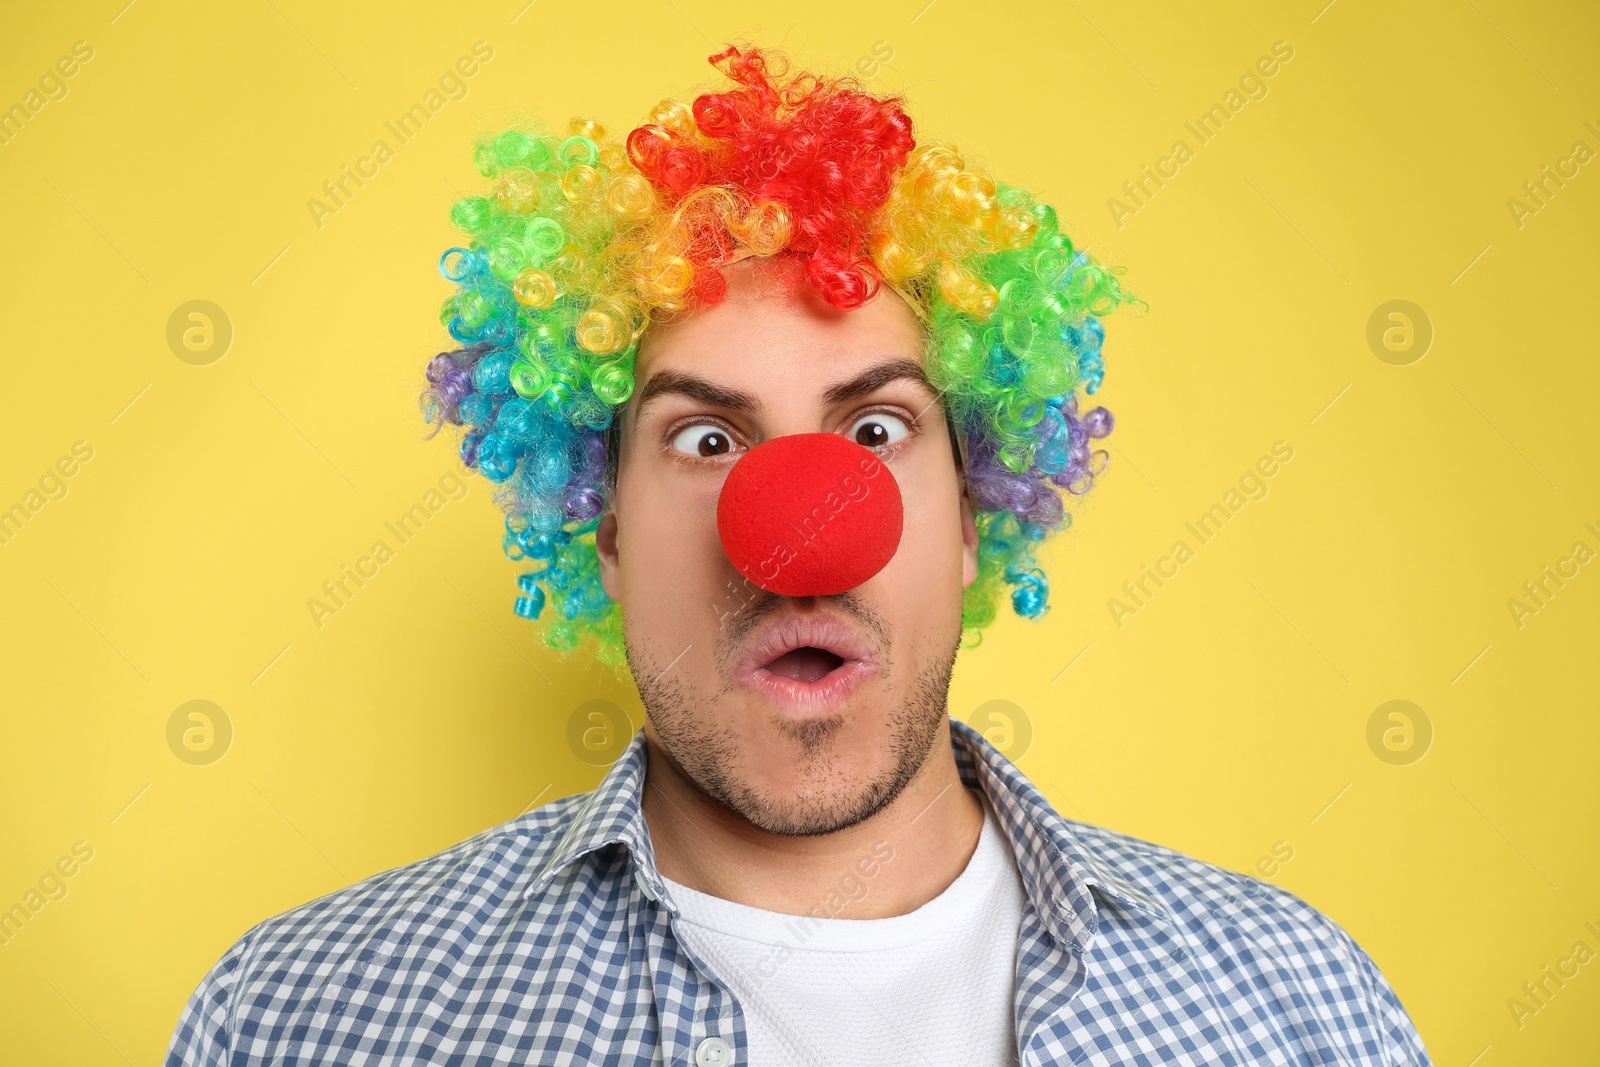 Photo of Funny man with clown nose and rainbow wig on yellow background. April fool's day